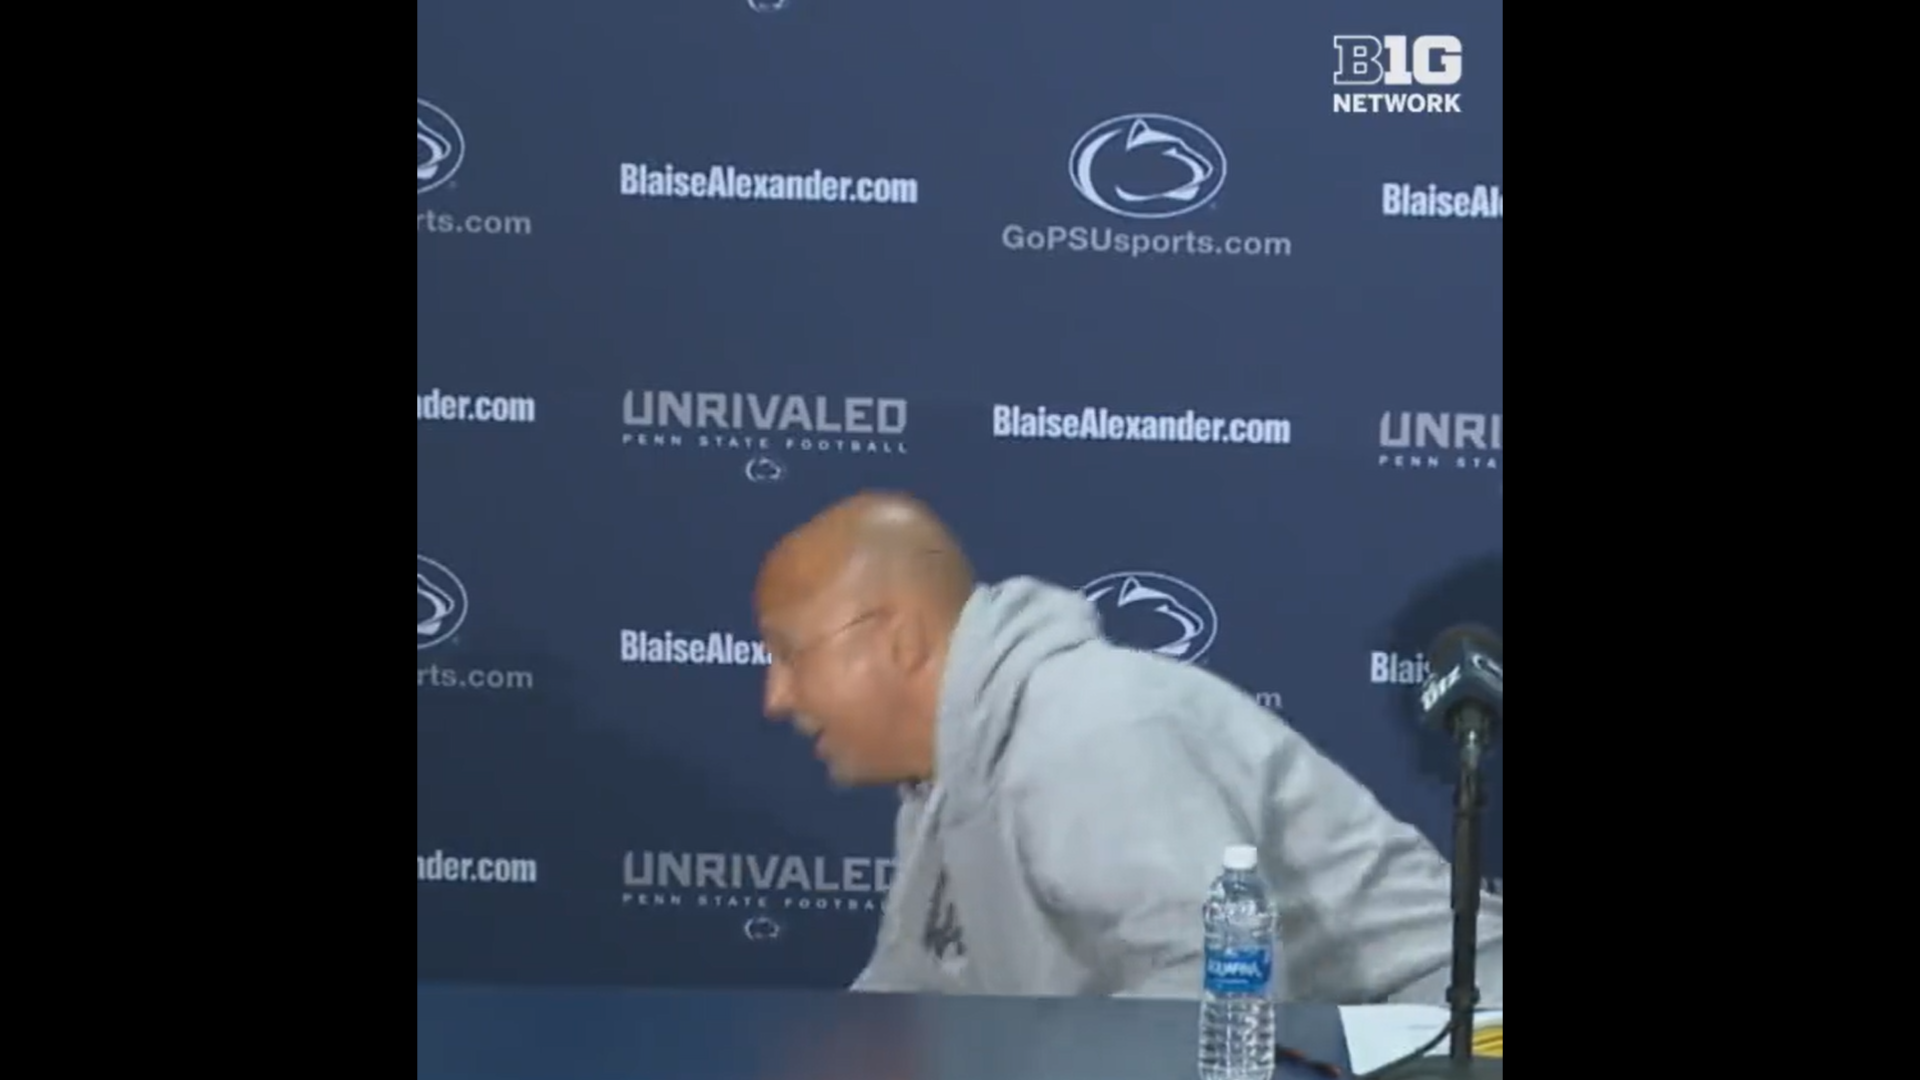 James Franklin does pushups during press conference over White Out factoid